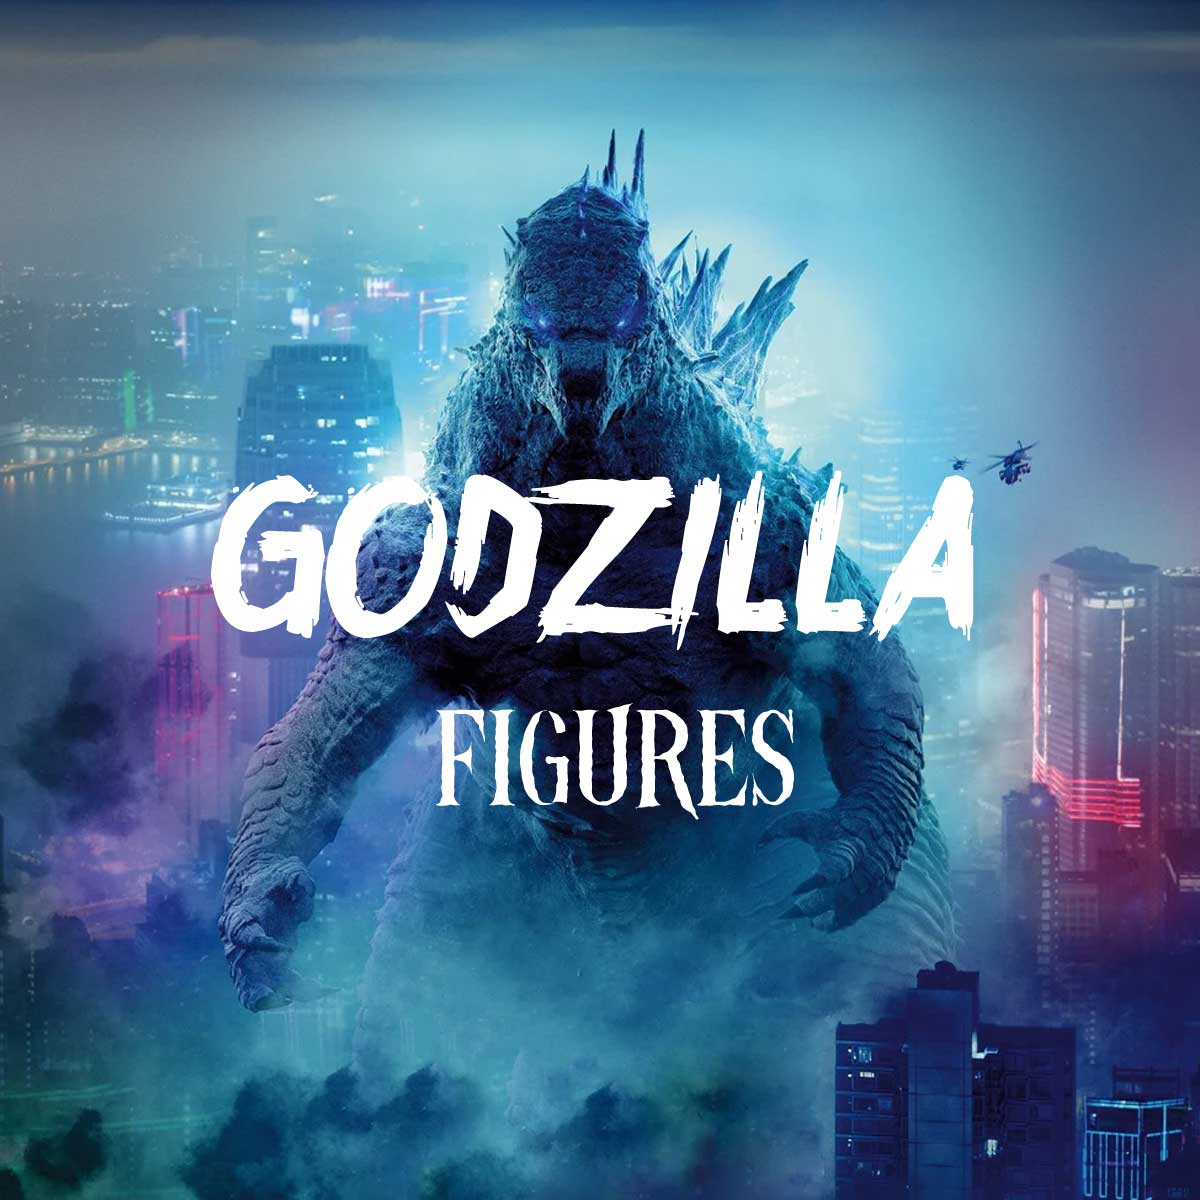 Godzilla towers over a misty city. Click this images to get to our collection of Godzilla figures